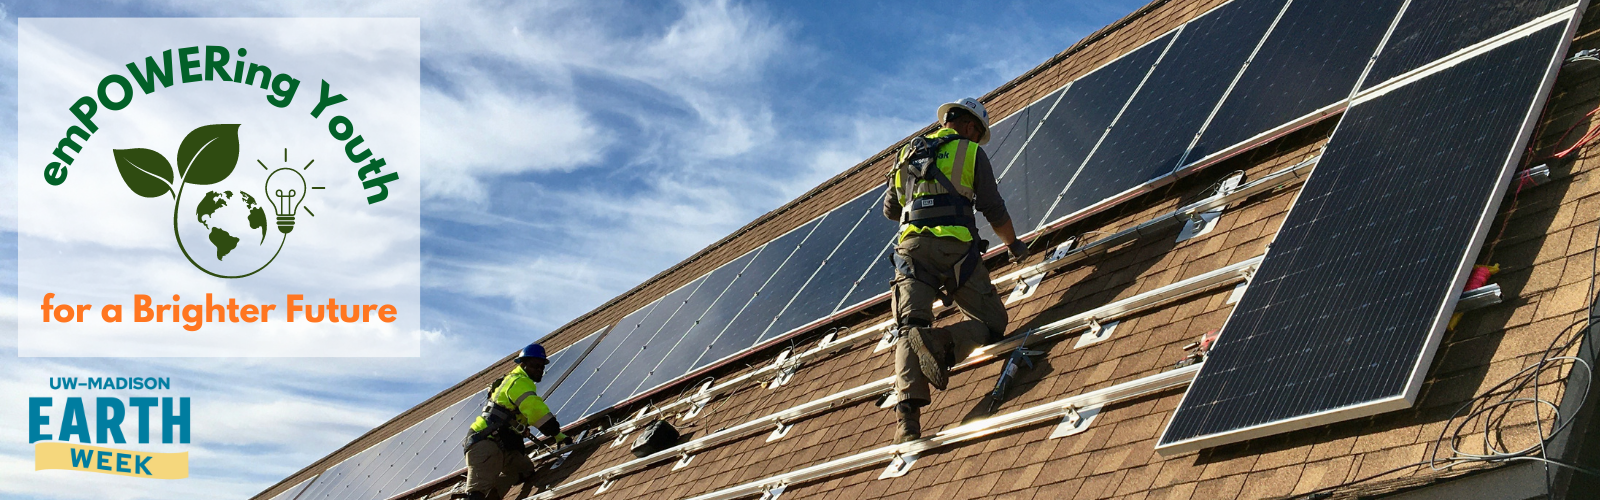 Workers on a rooftop installing solar panels